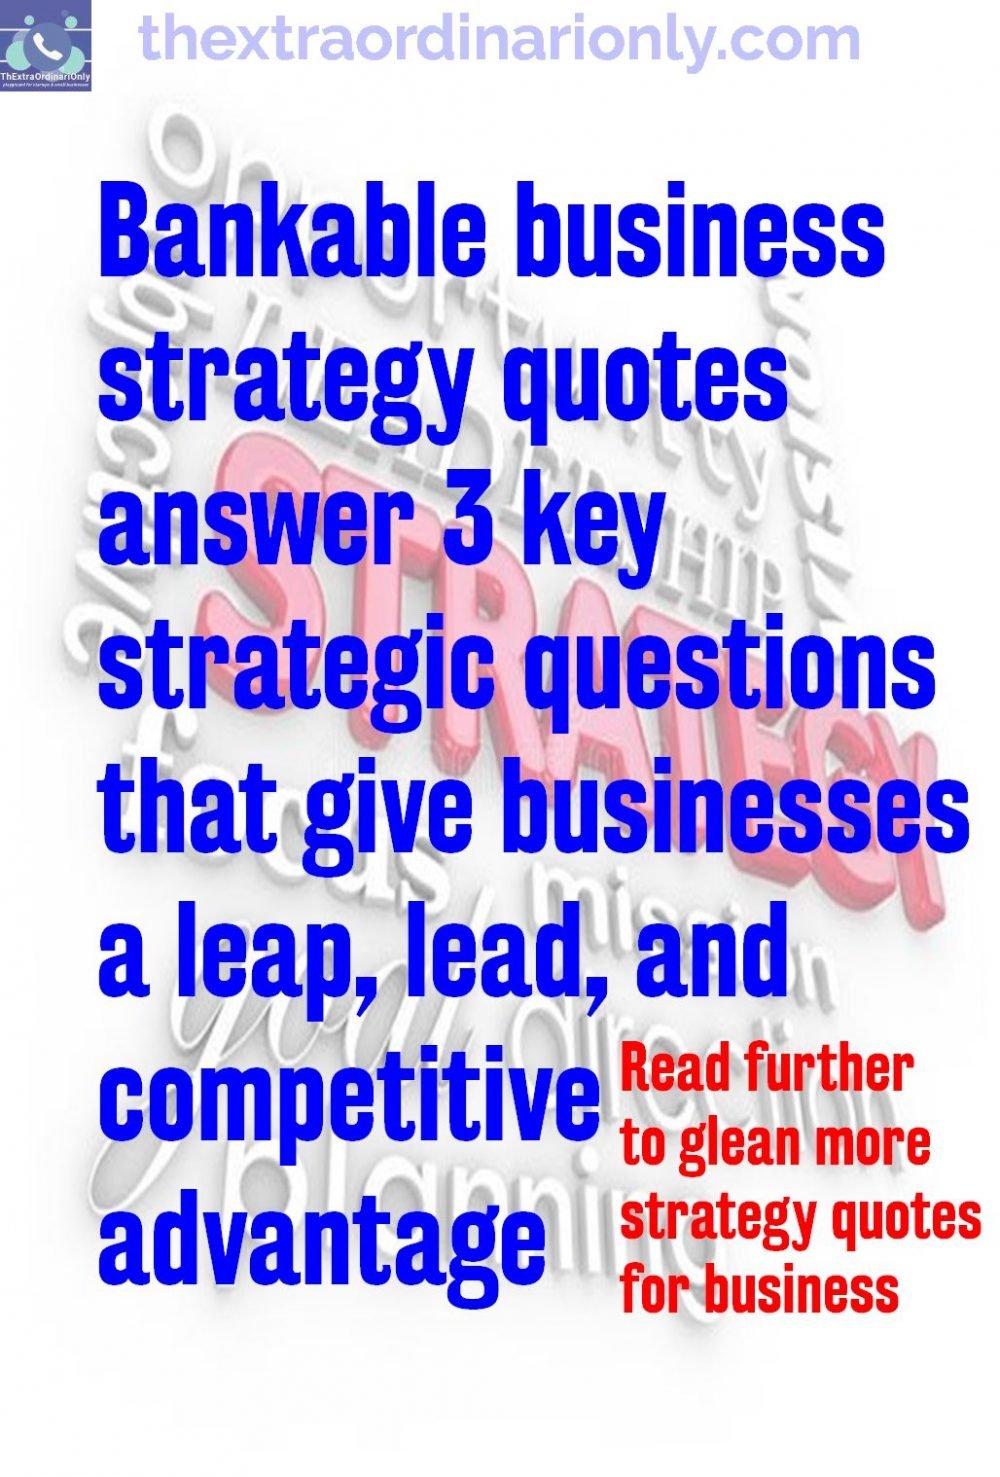 ThExtraordinariOnly great business strategy quotes for entrepreneurs give a leap, lead, and advantage to a business